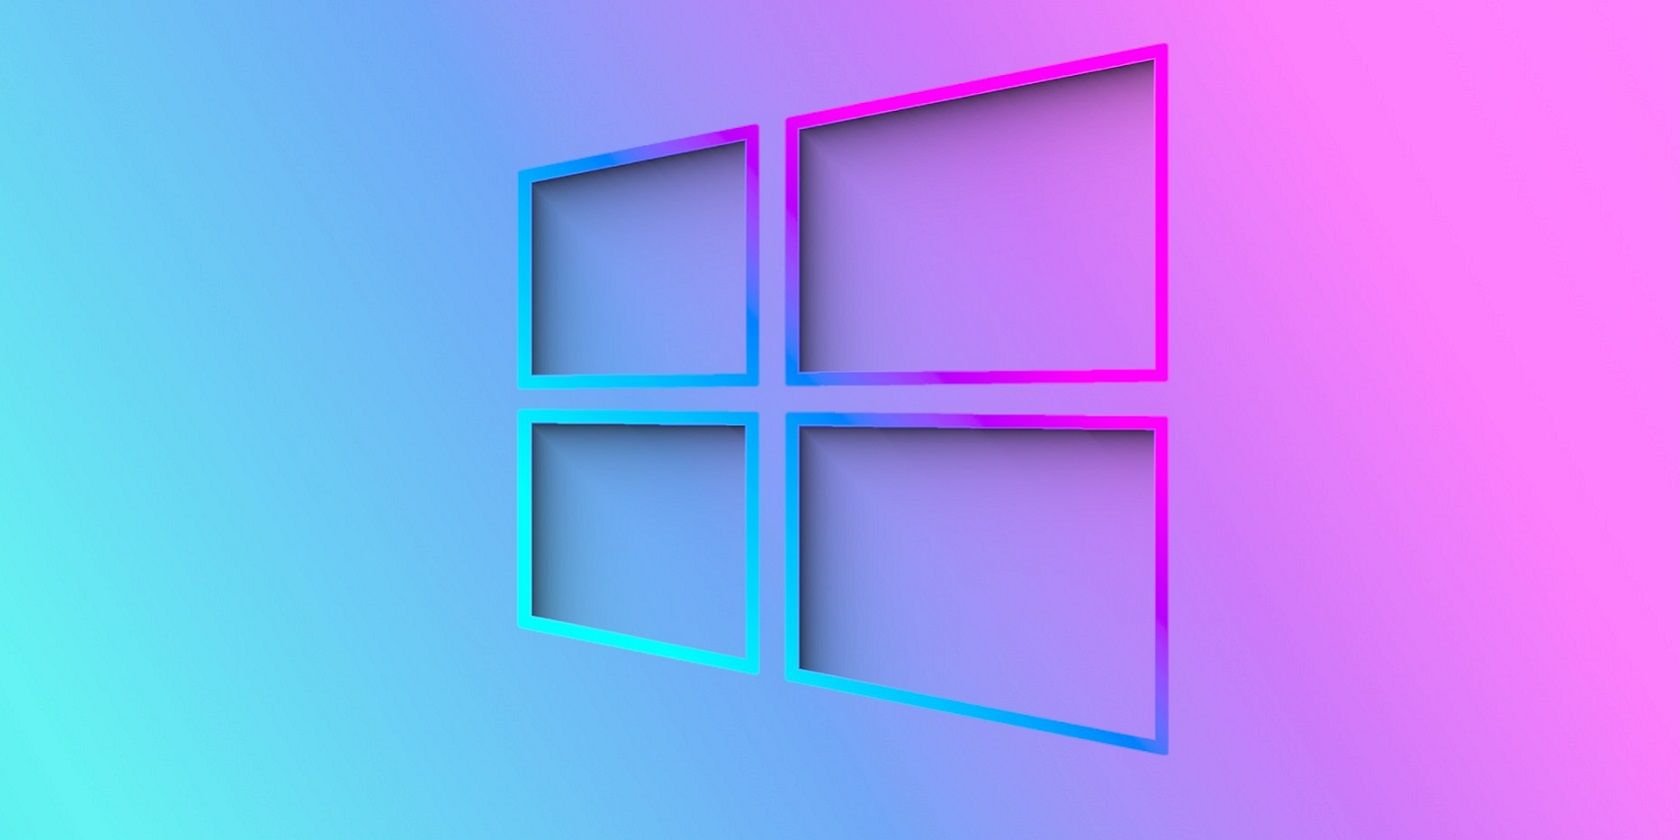 A Brief History of Windows From 1985 to Present Day